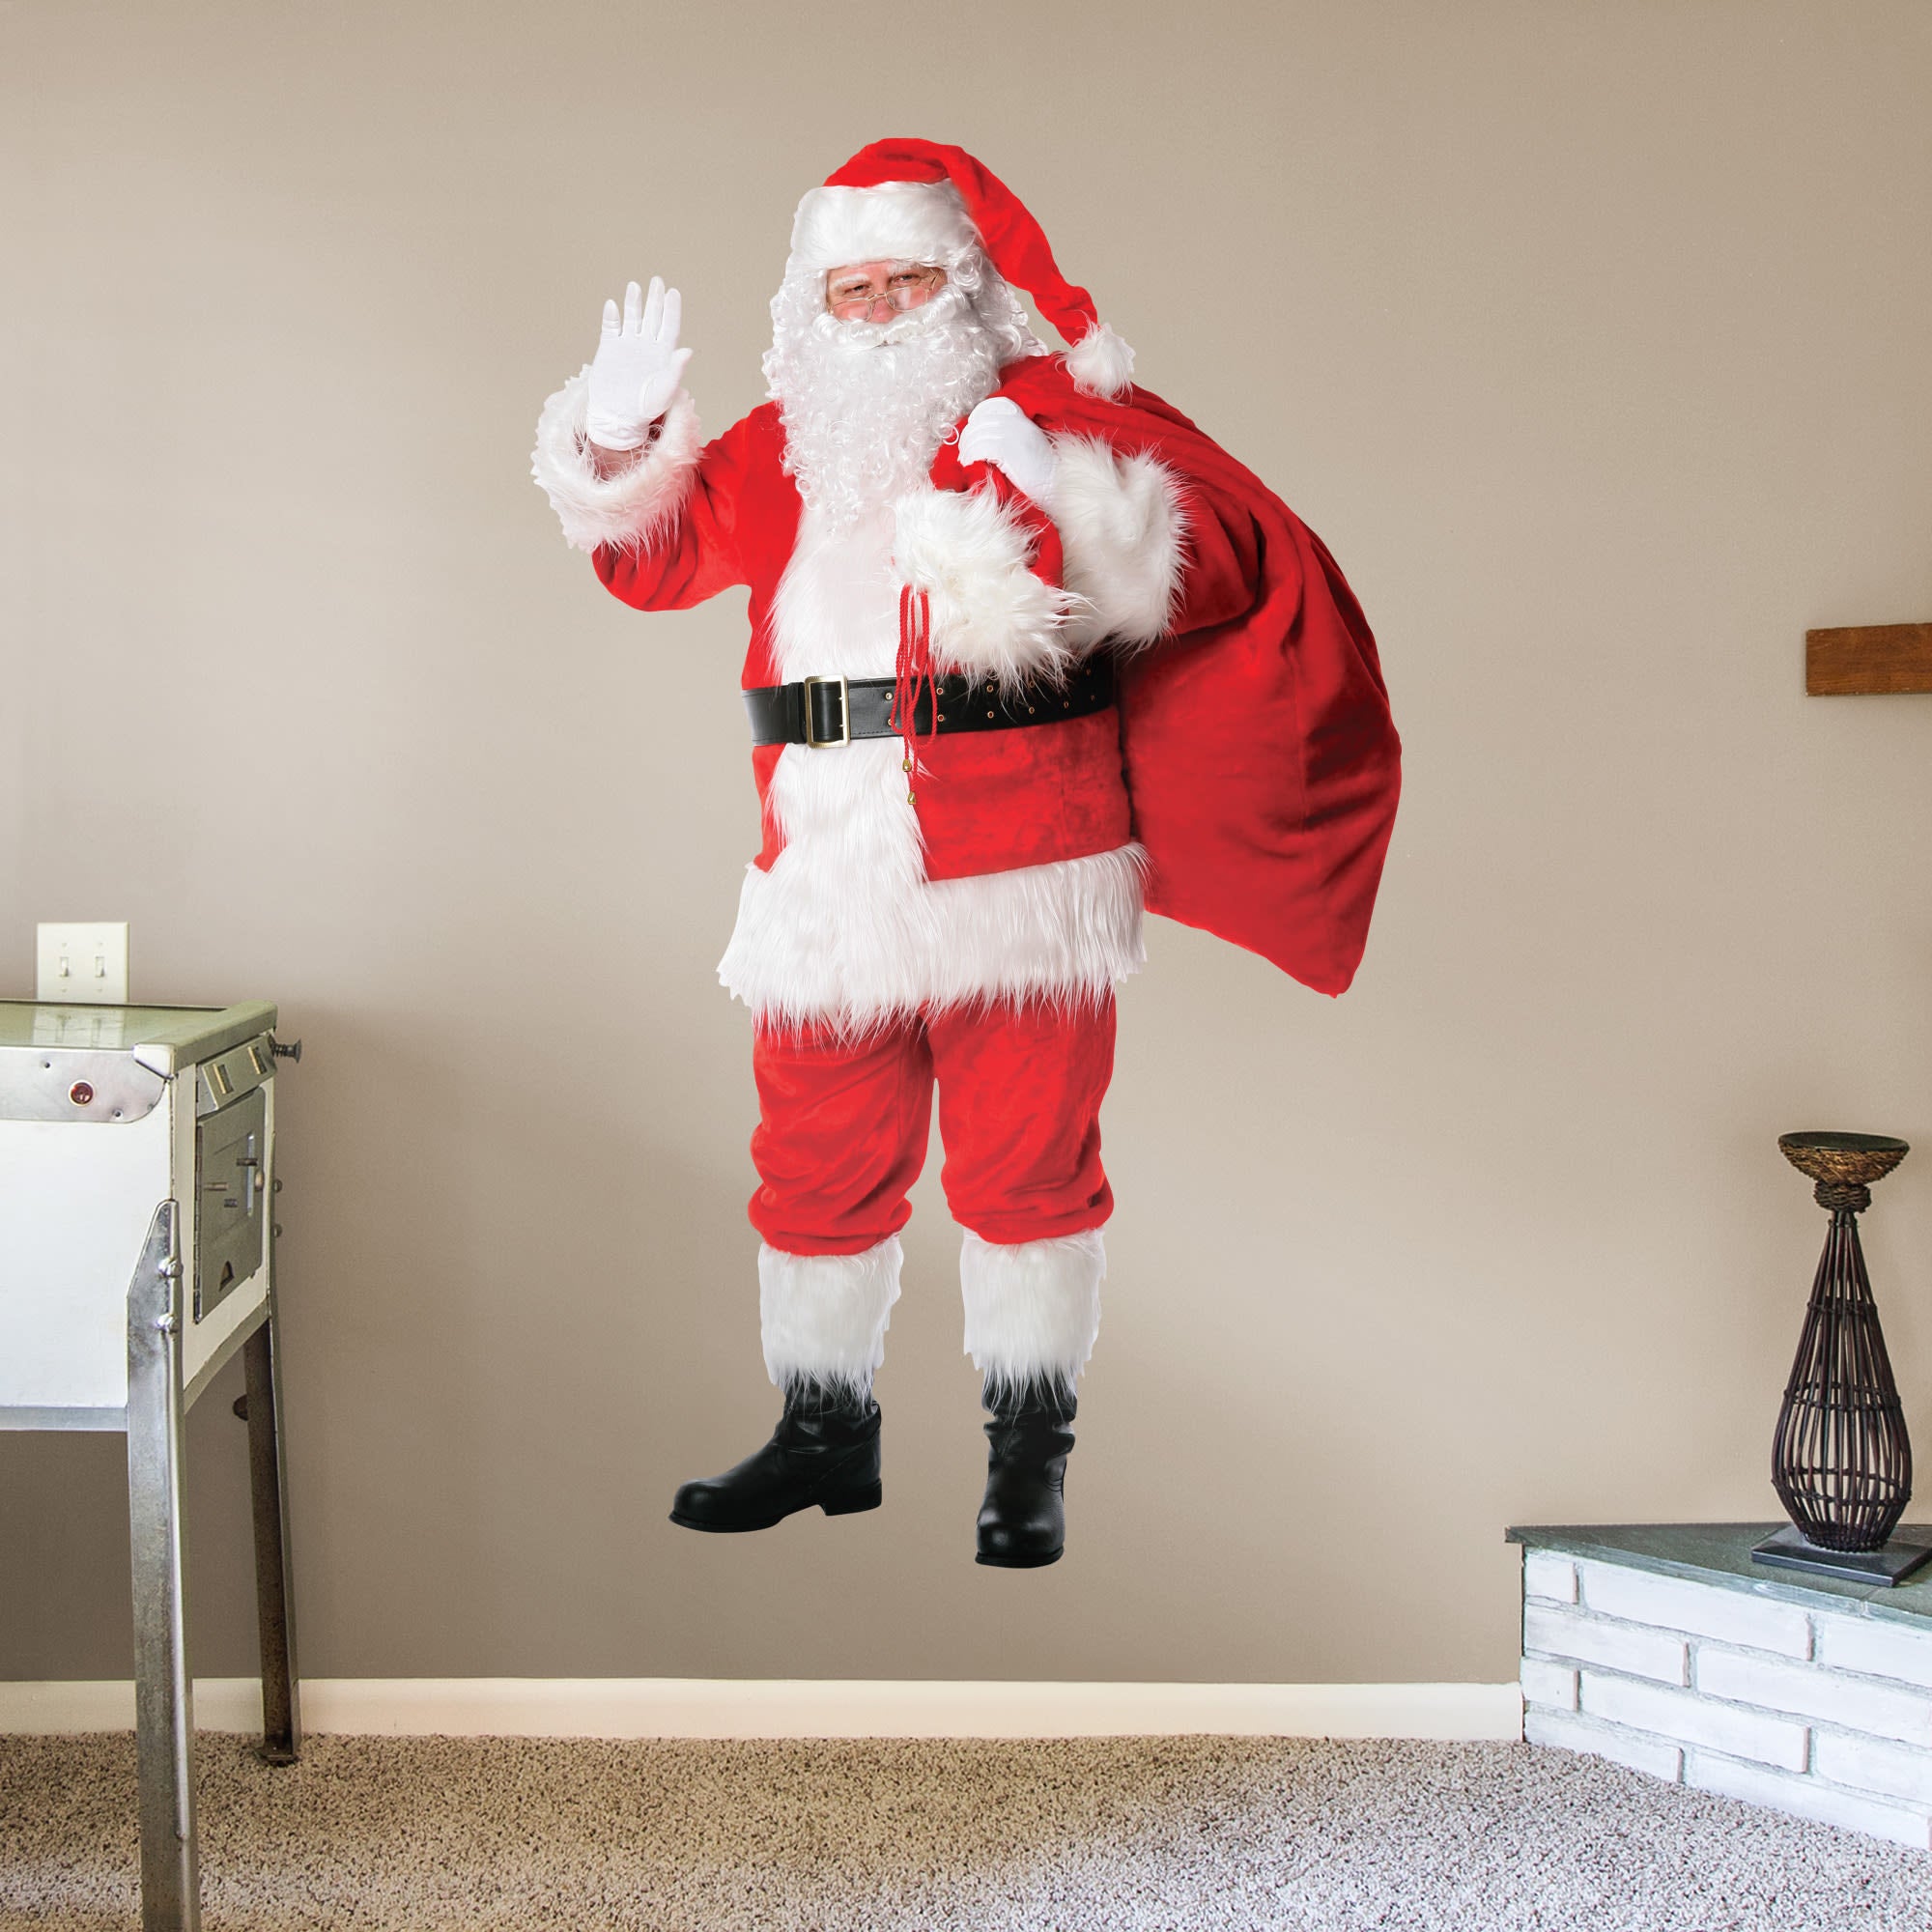 Santa Claus - Removable Wall Decal Life-Size Character + 2 Licensed Decals (46"W x 75"H) by Fathead | Vinyl